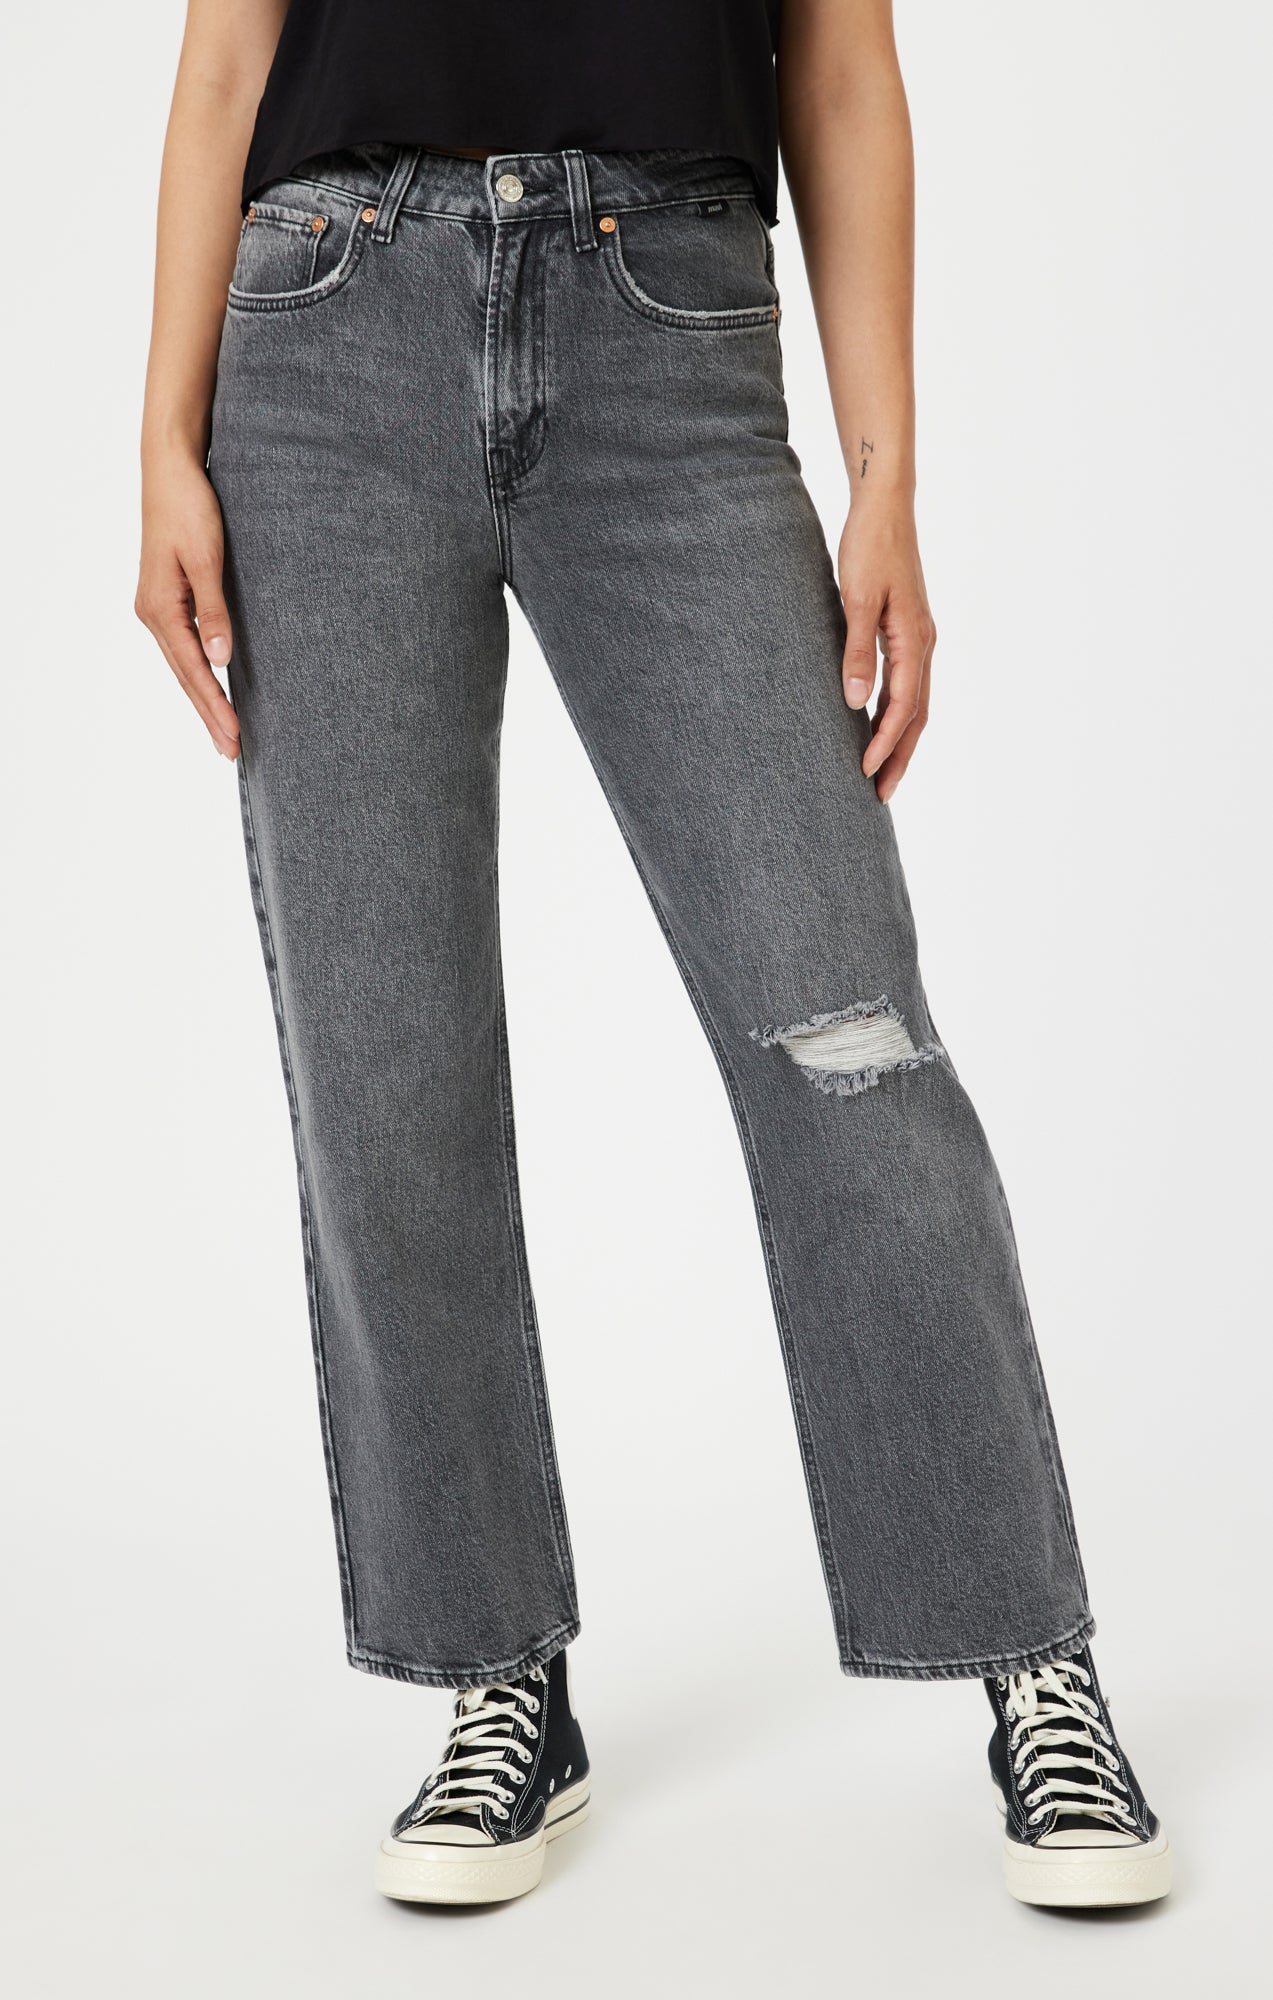 Grey Jeans for Women, Womens Grey Jeans